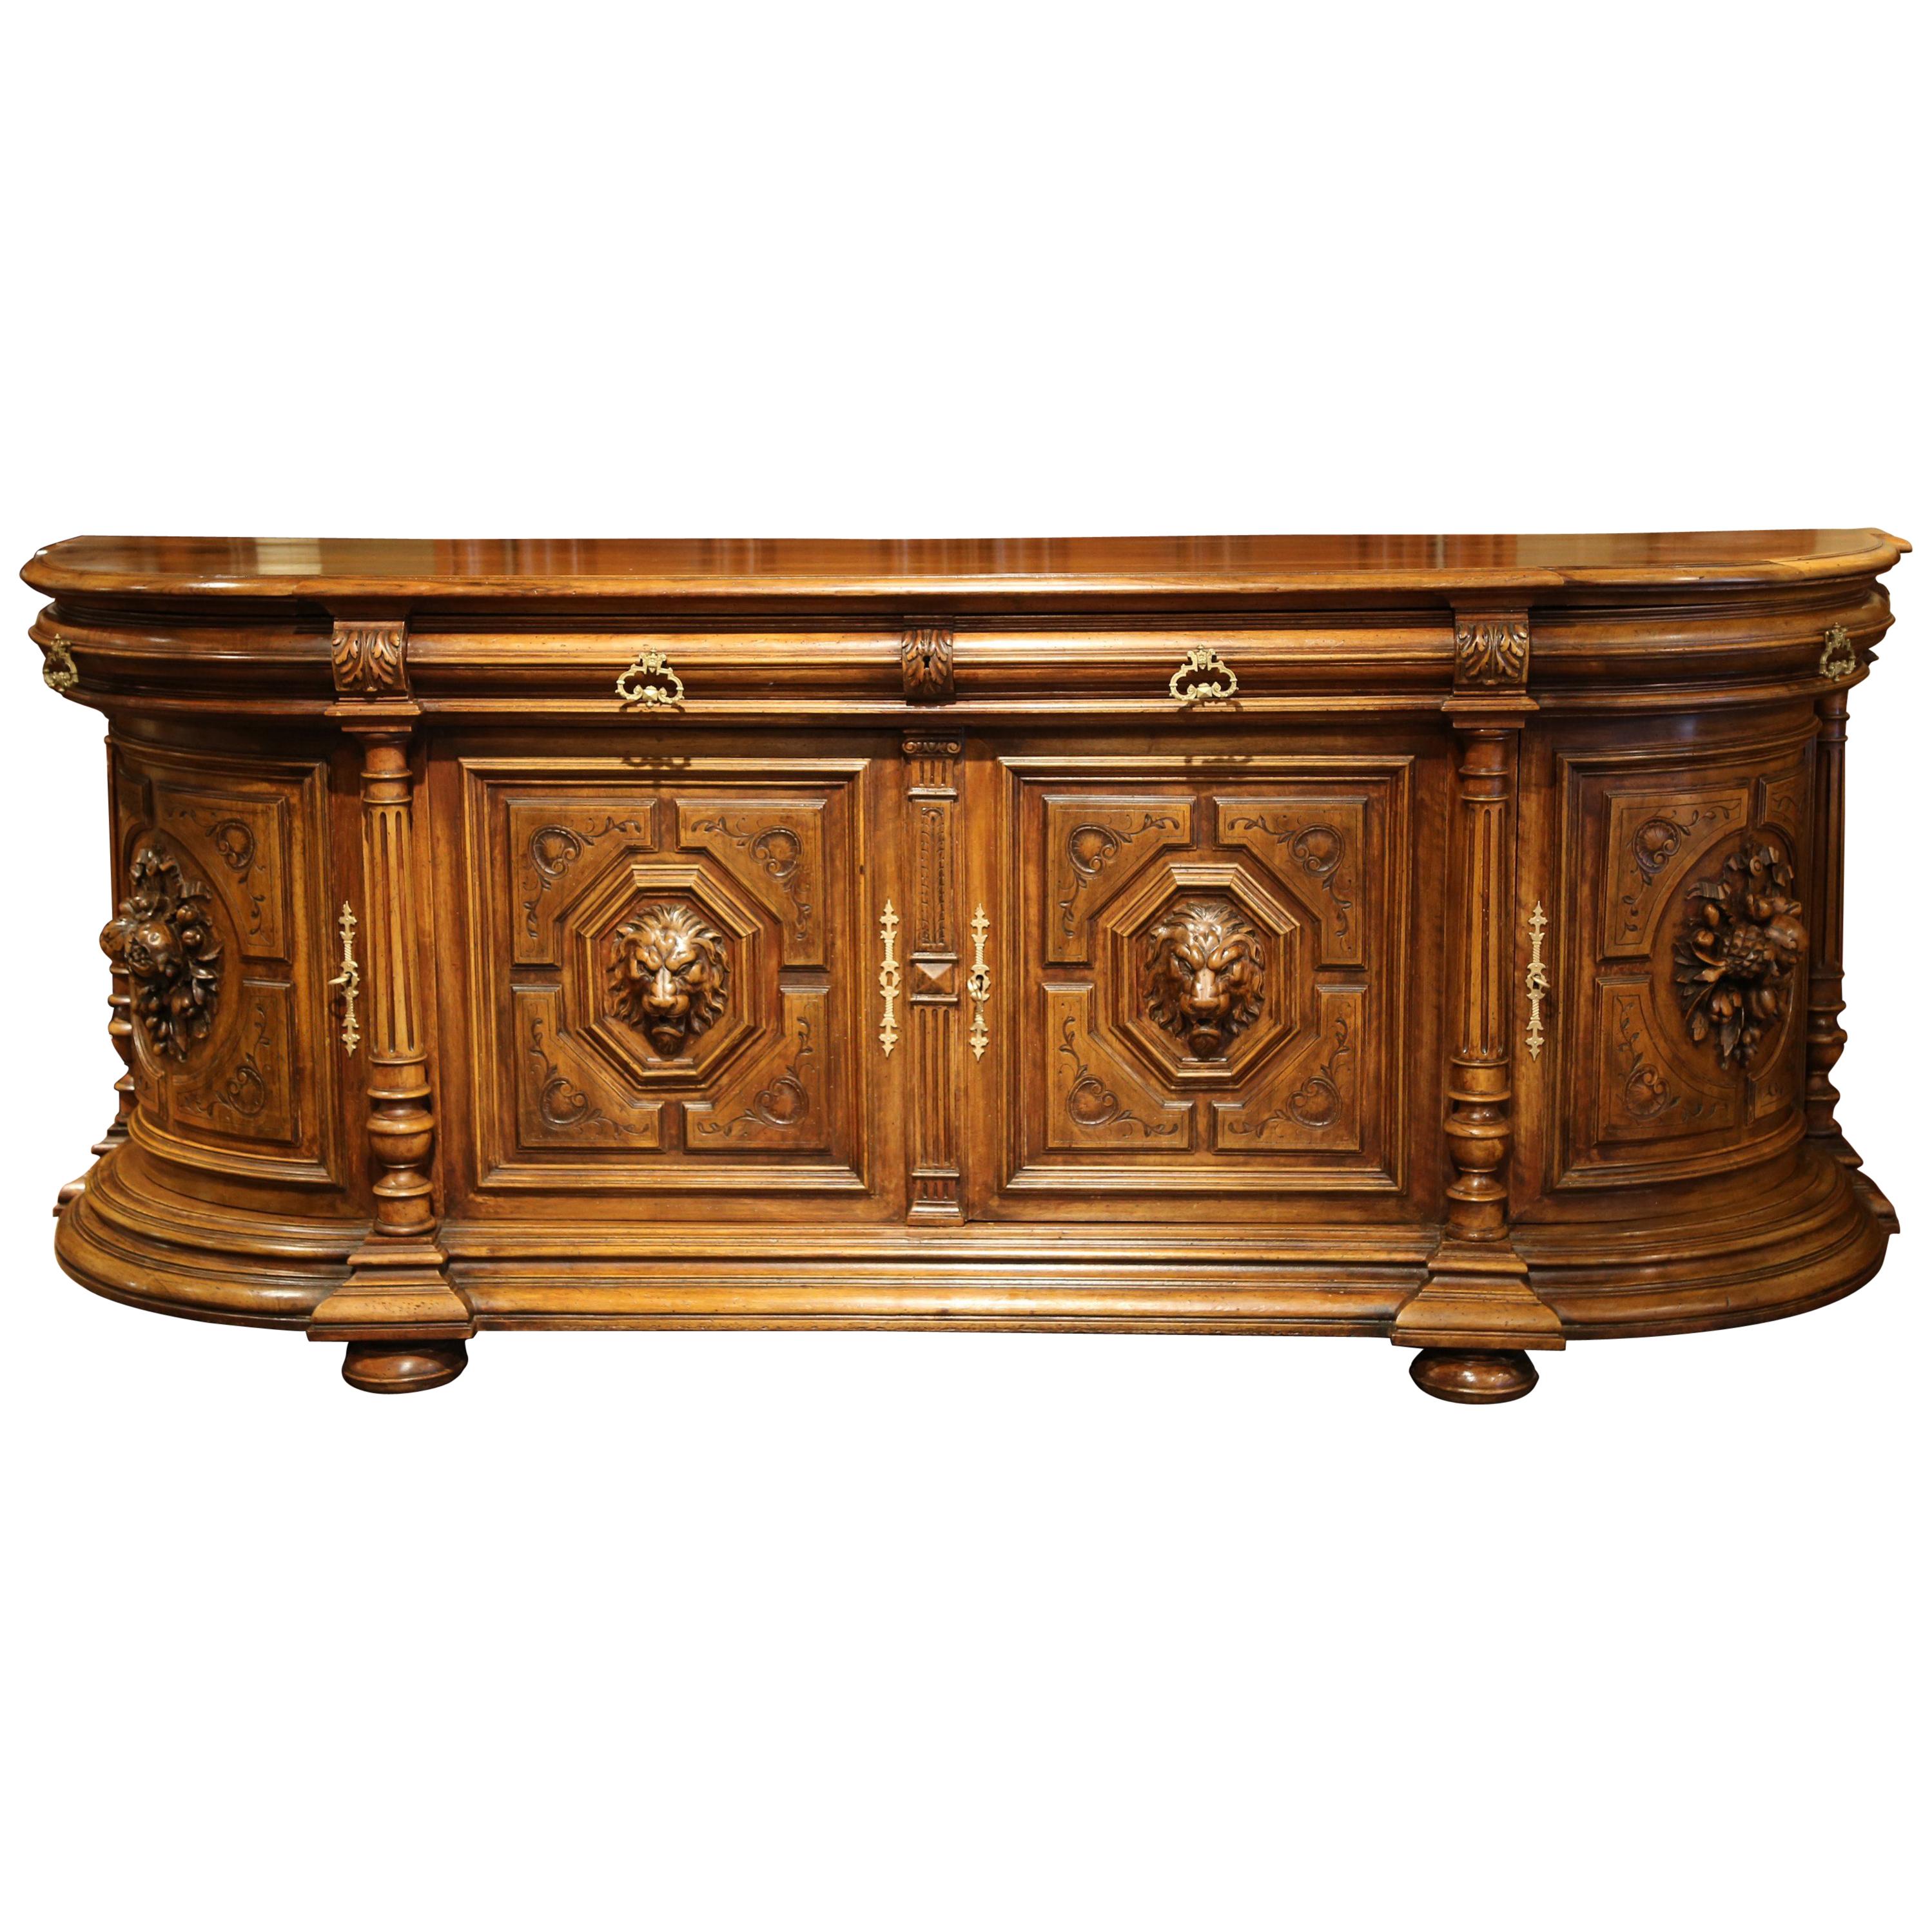 Important 19th Century French Walnut Four-Door Buffet with Carved Medallions